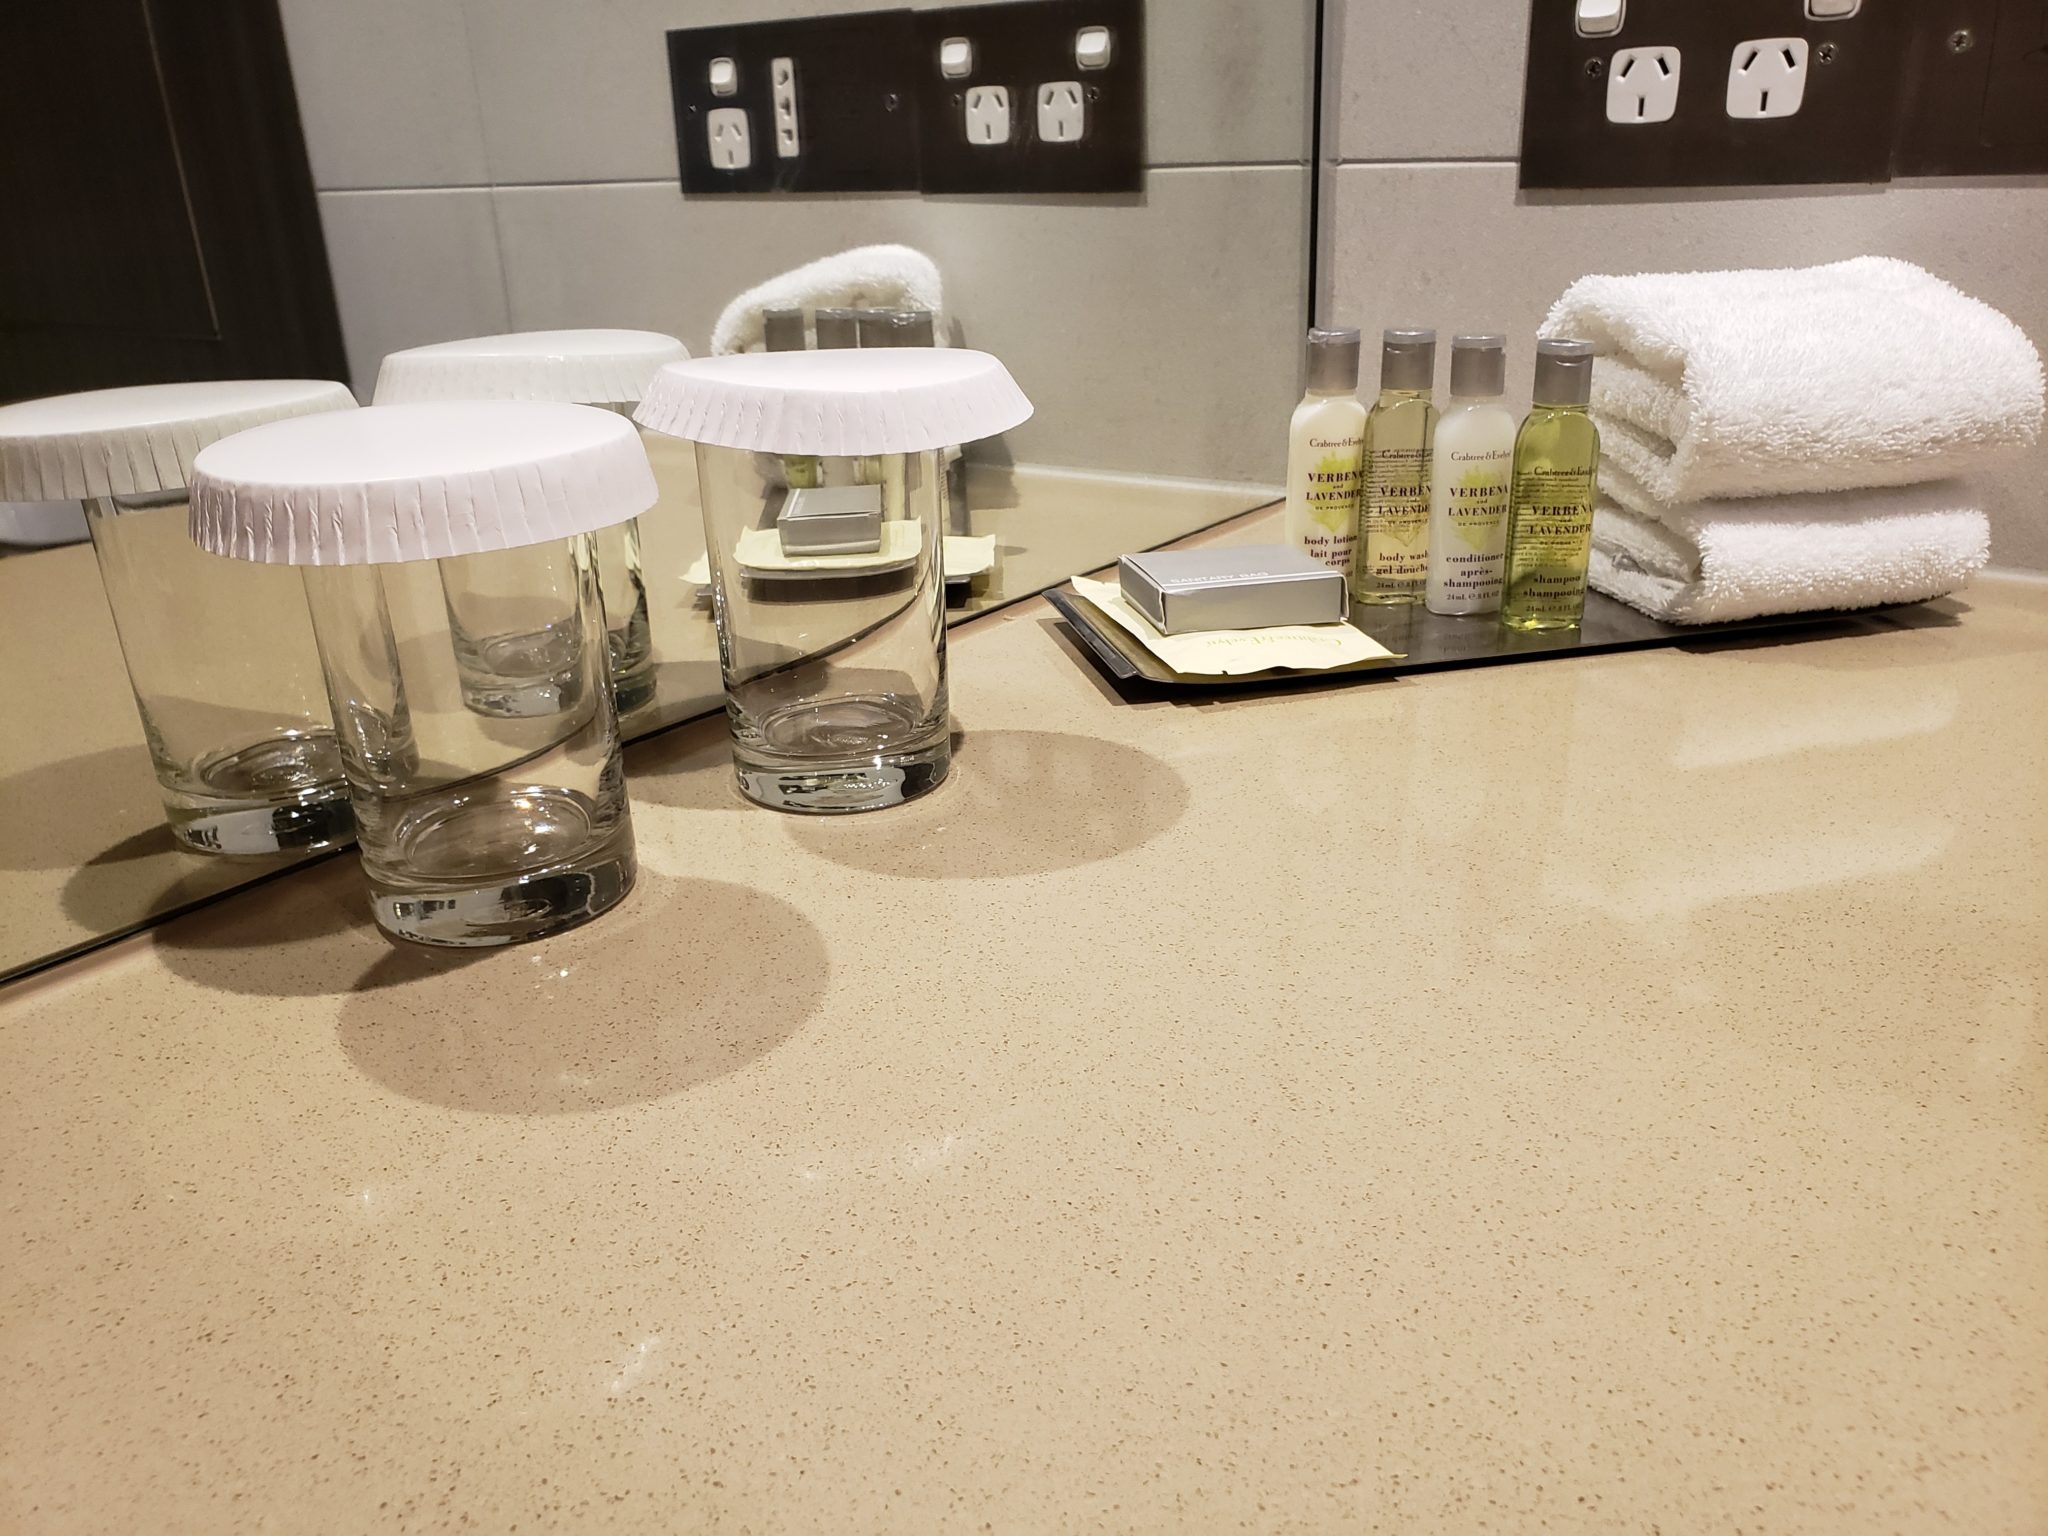 a group of glasses on a counter